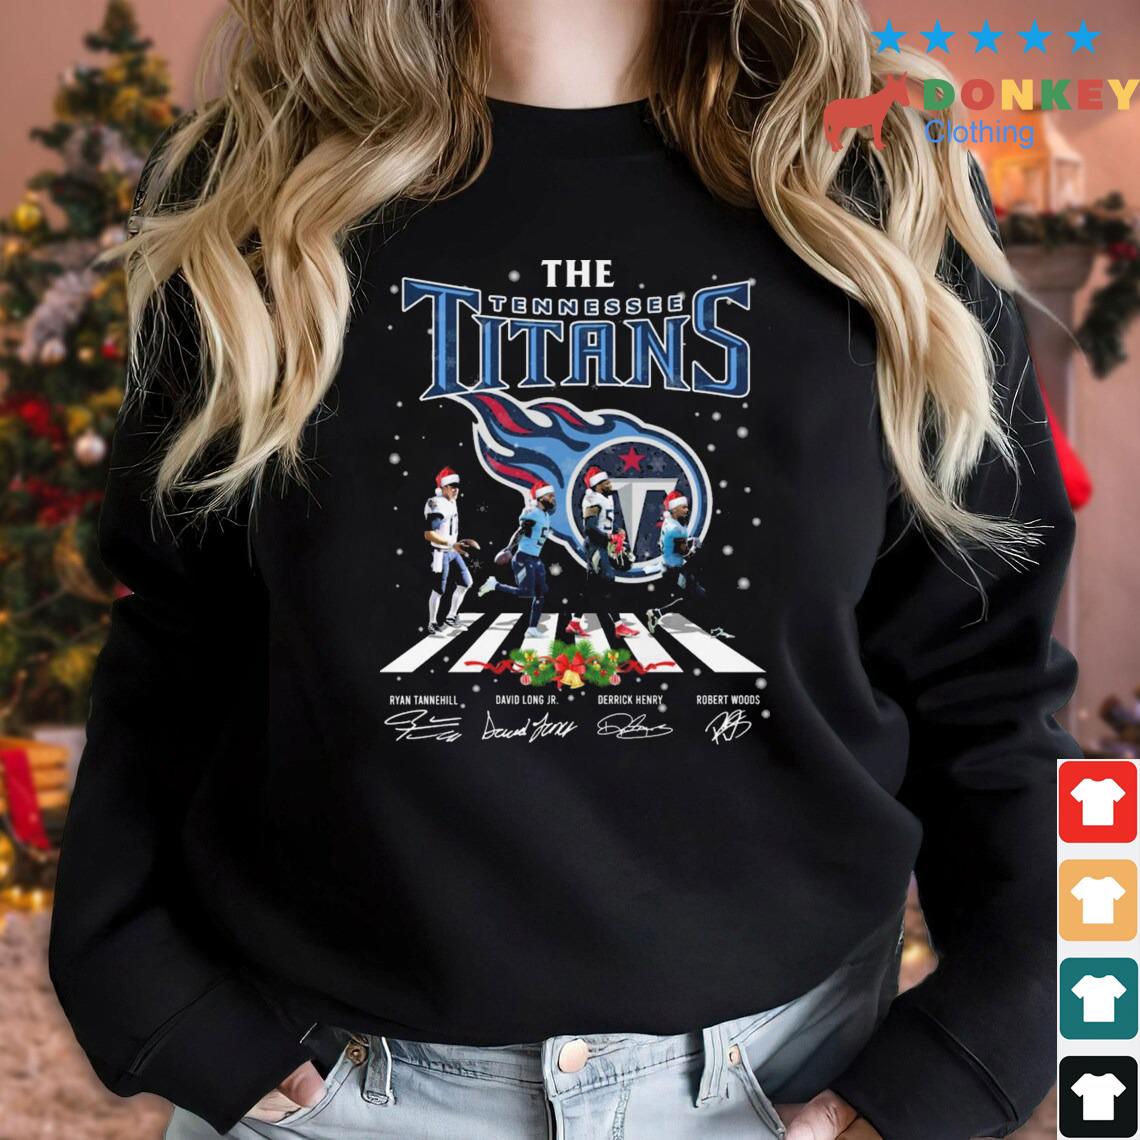 The Tennessee Titans Abbey Road Signatures 2022 Merry Christmas sweatshirt